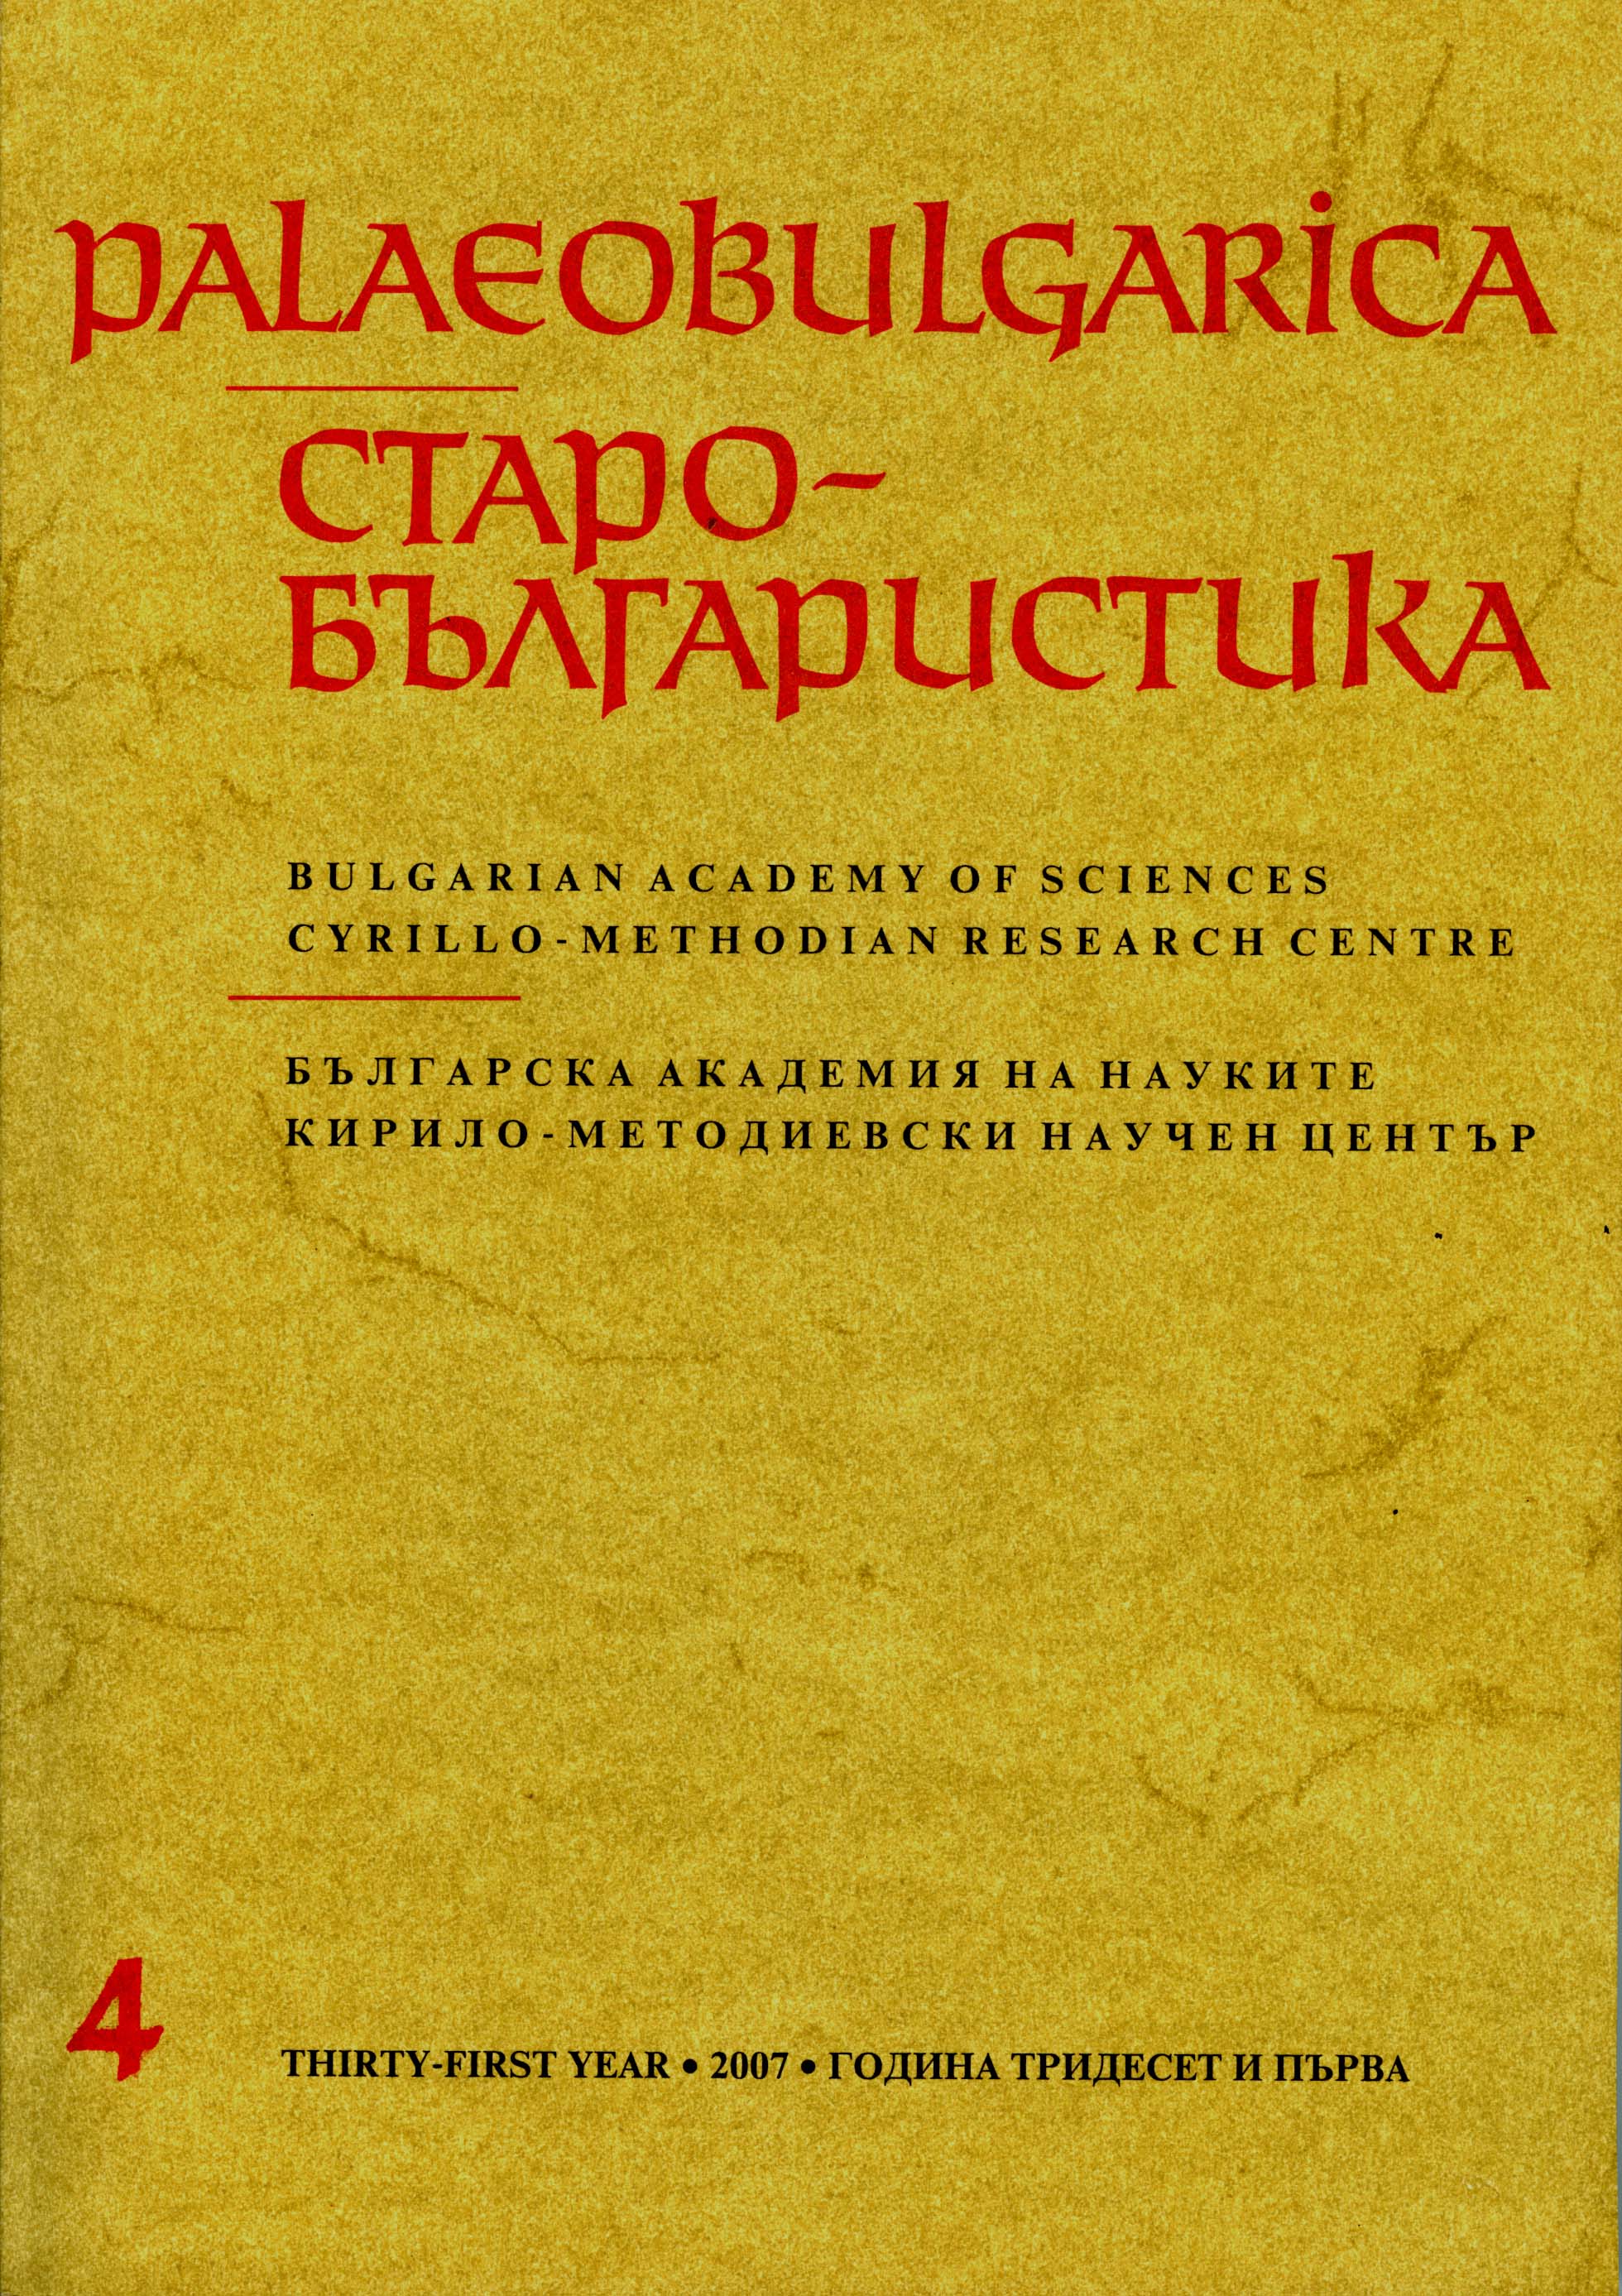 About Job and Sophia or about the New Book by Iskra Hristova Cover Image